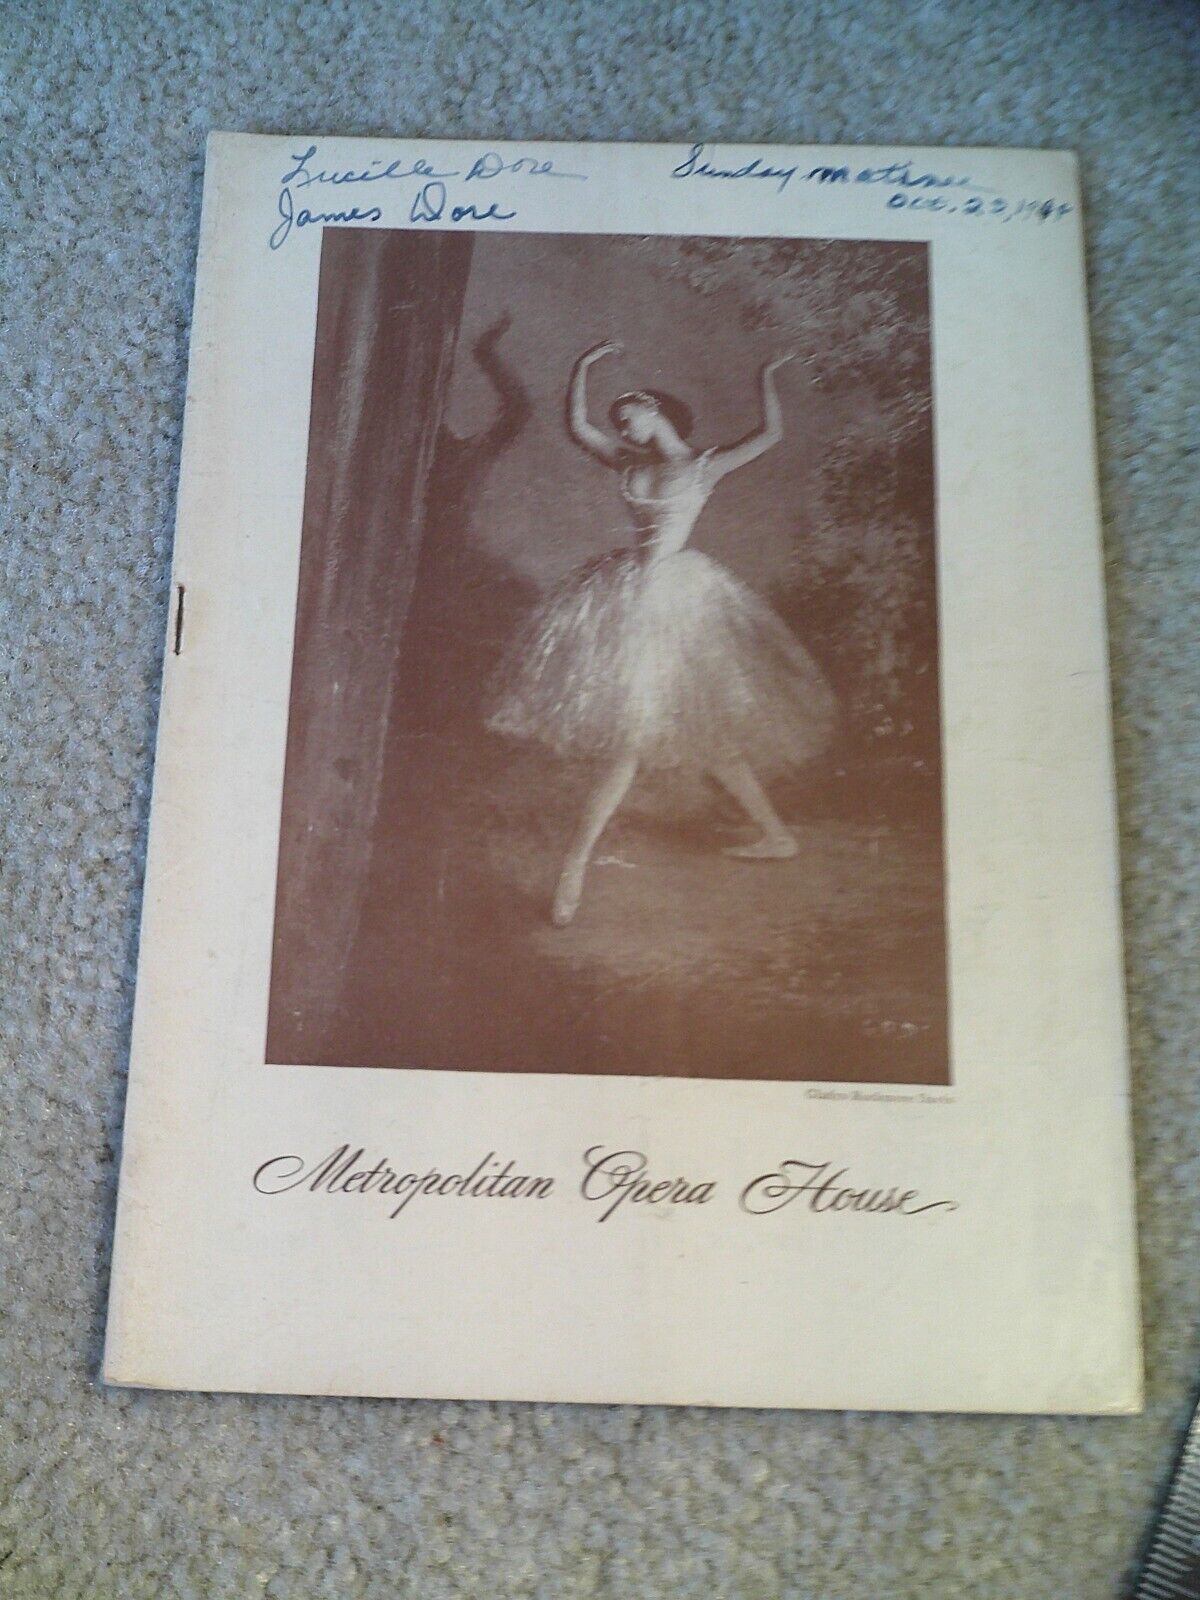 Primary image for Vintage 1944 Playgoer Playbill Metropolitan Opera House Ballet Theatre